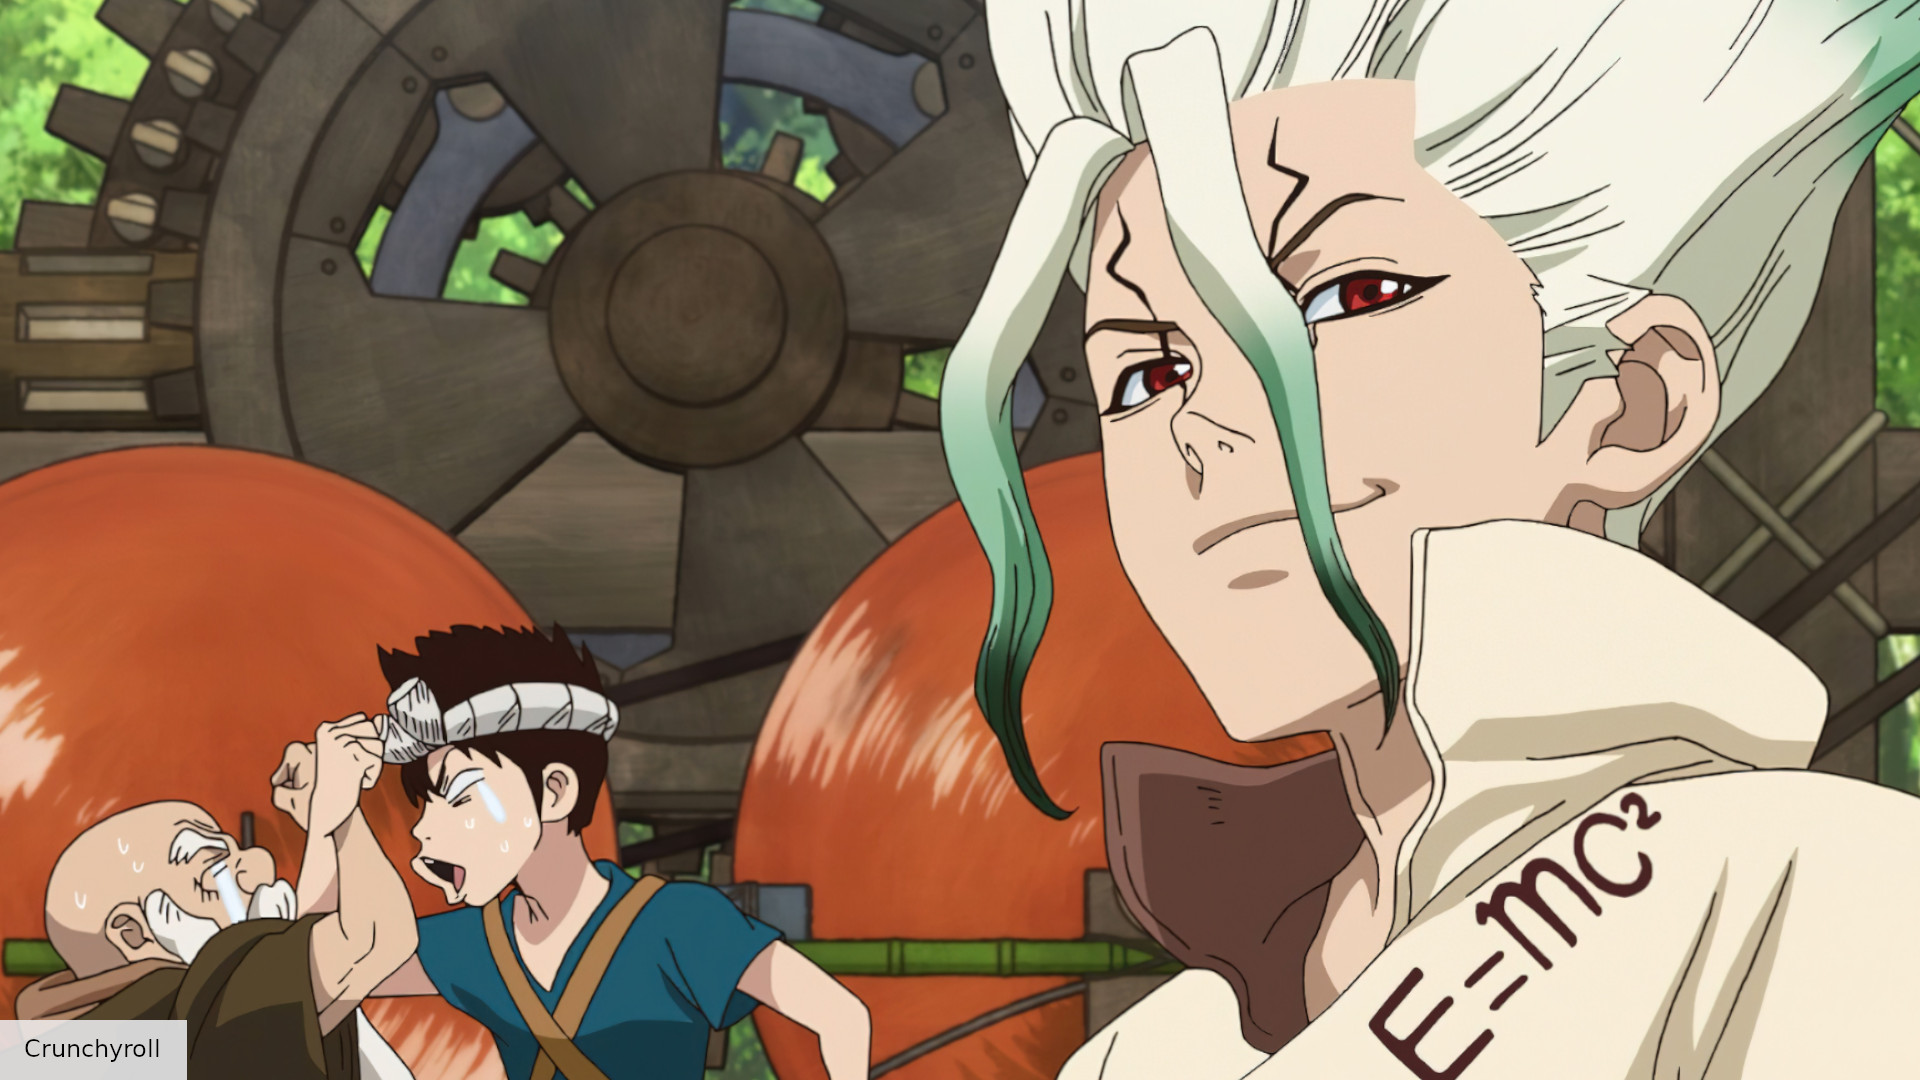 Dr. Stone Season 3 Episode 1 Release Date & Time